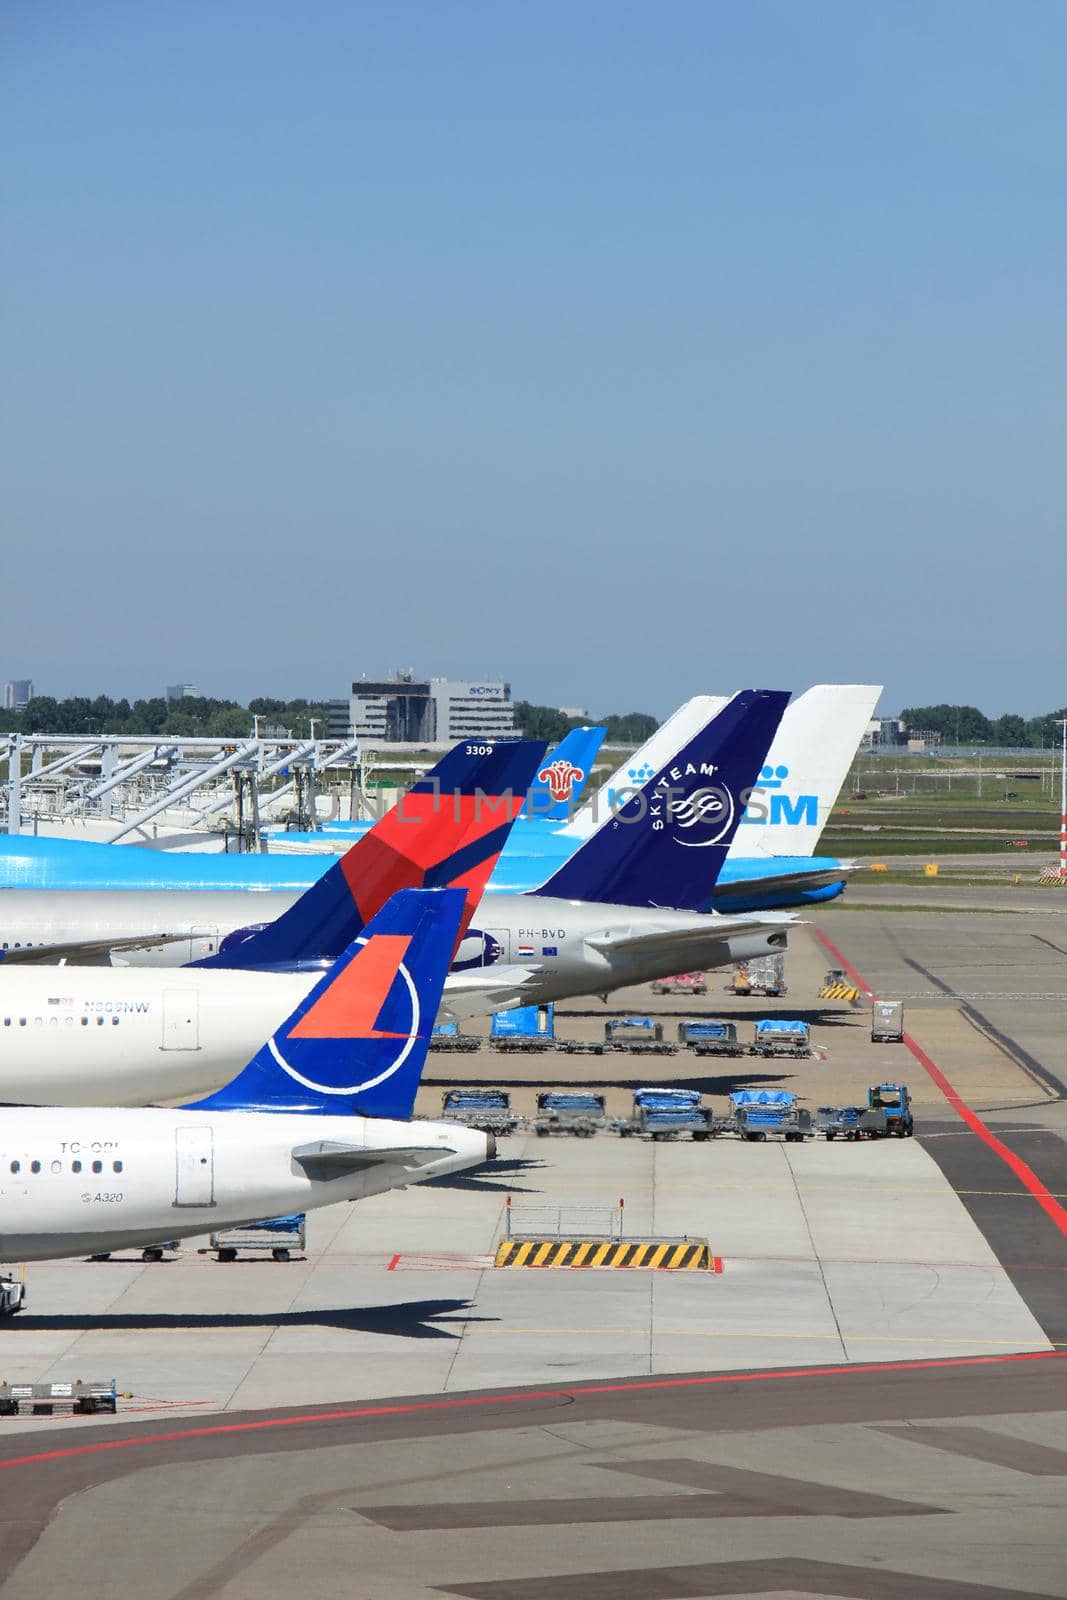 Amsterdam The Netherlands -  May 26th 2017: Planes of several major airlines parked at the gates at Schiphol Amsterdam International Airport